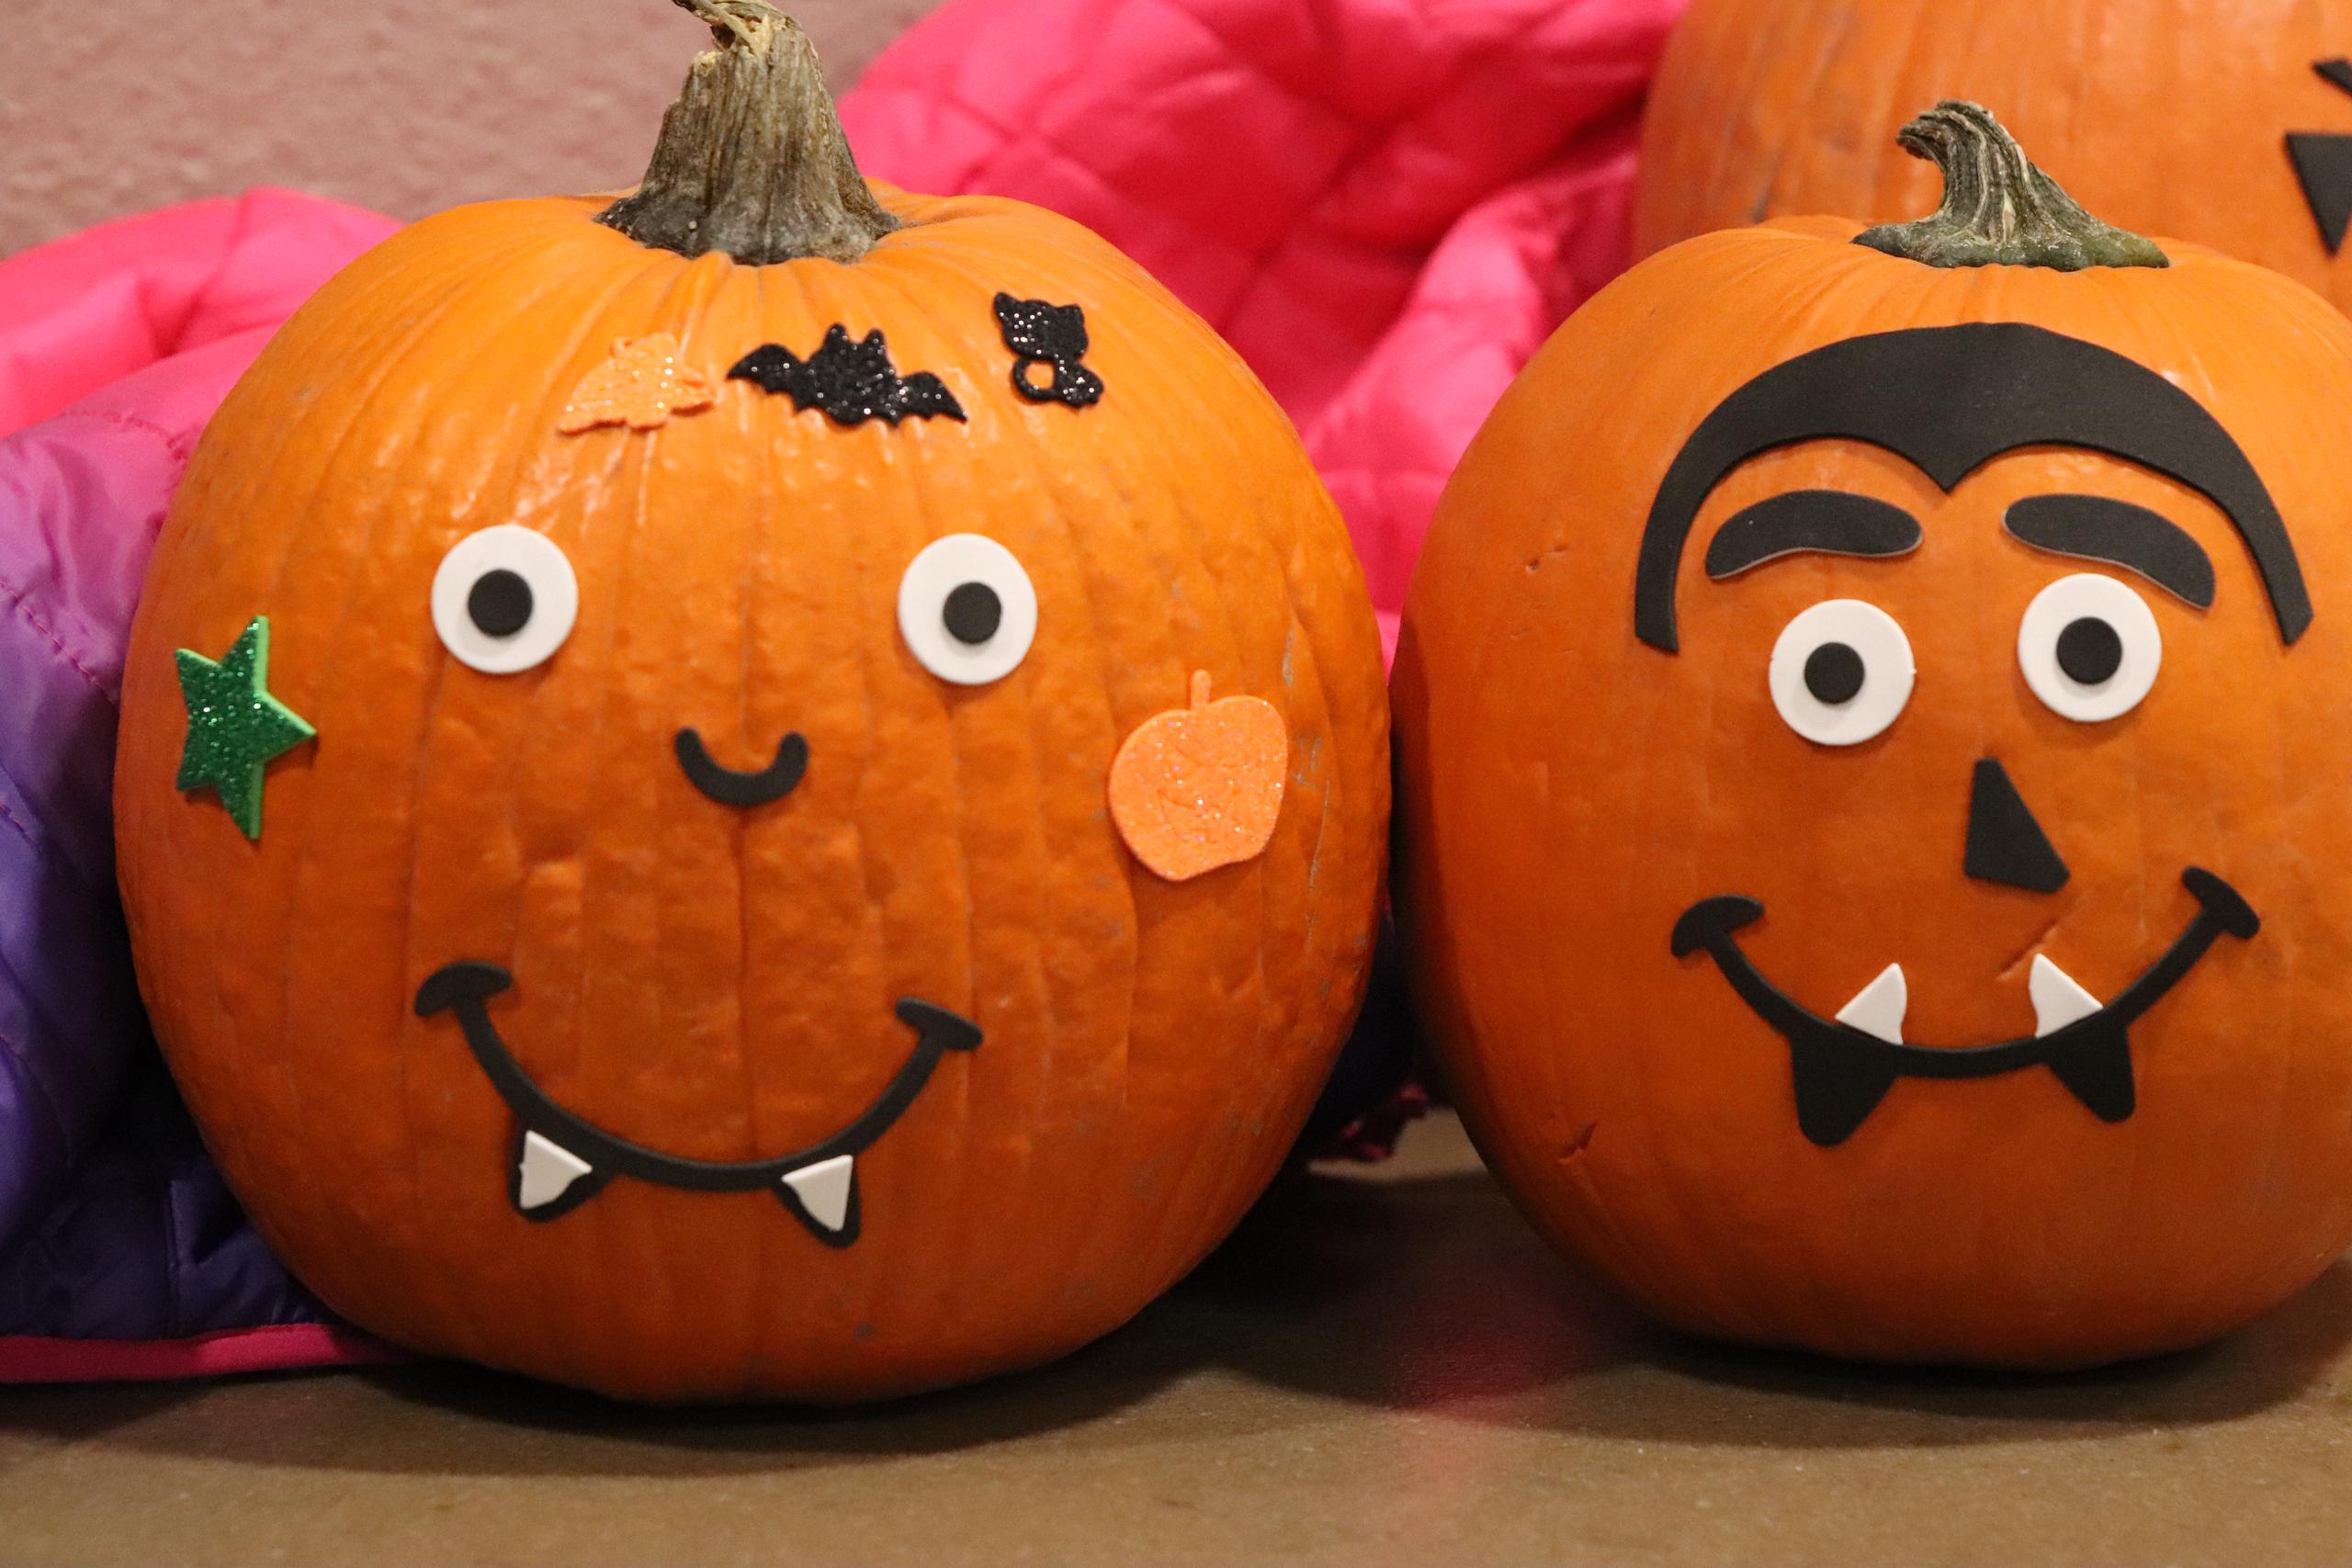 Two pumpkins decorated with foam faces